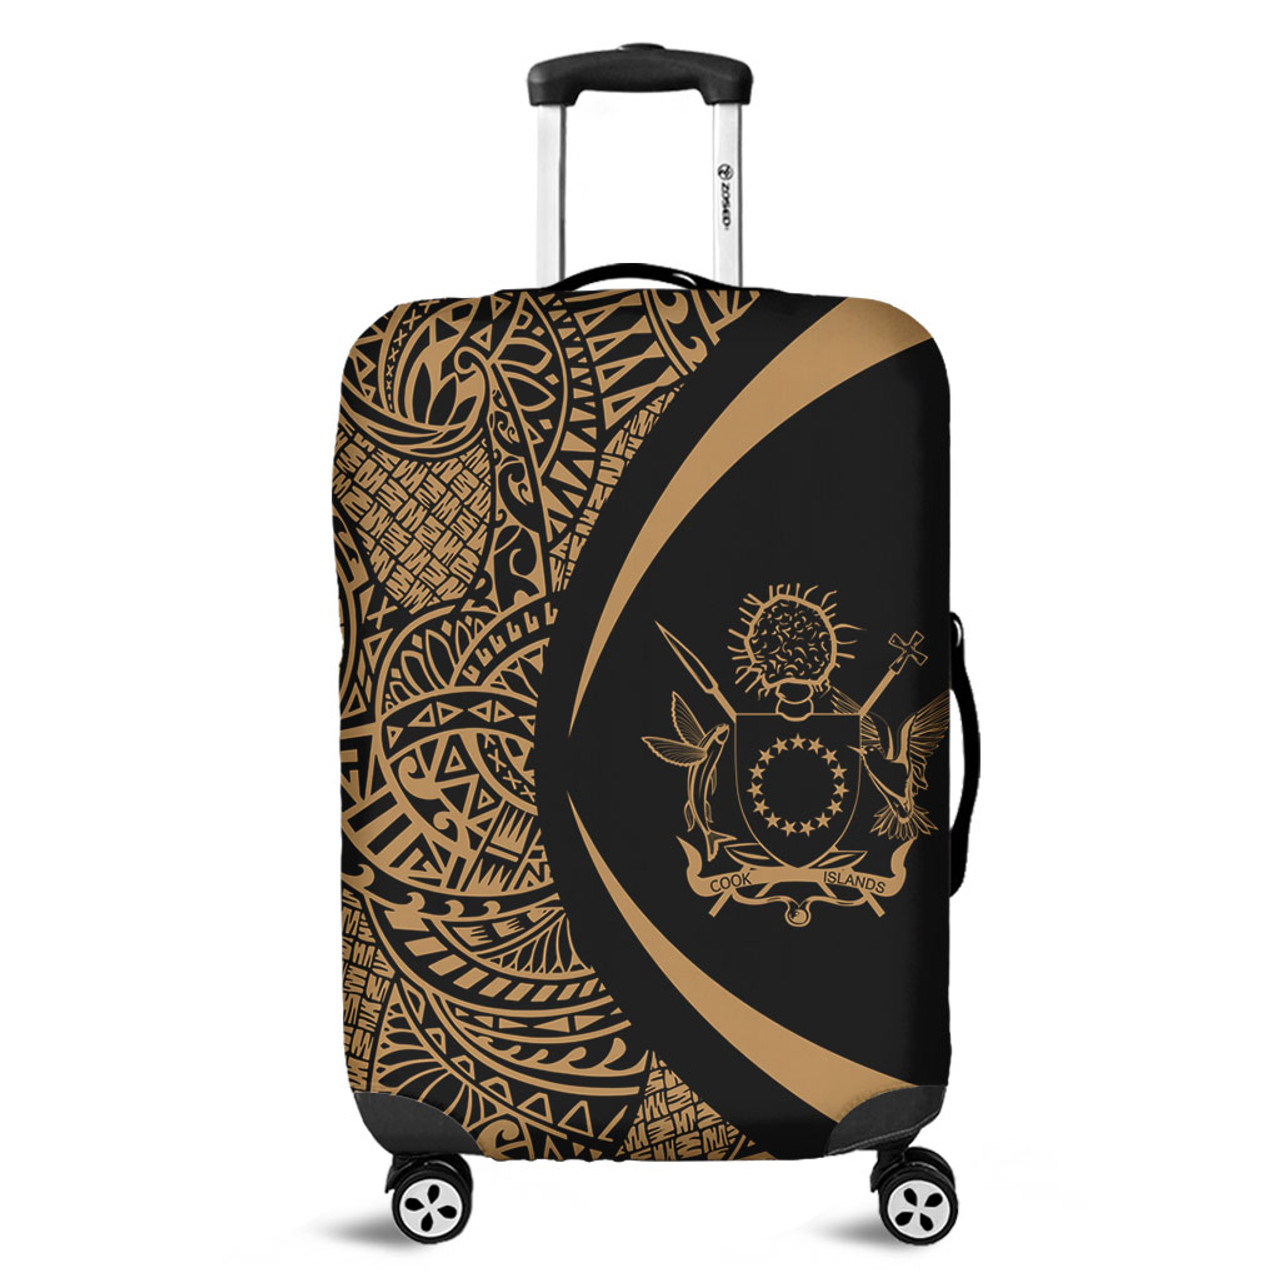 Cook Islands Luggage Cover Lauhala Gold Circle Style